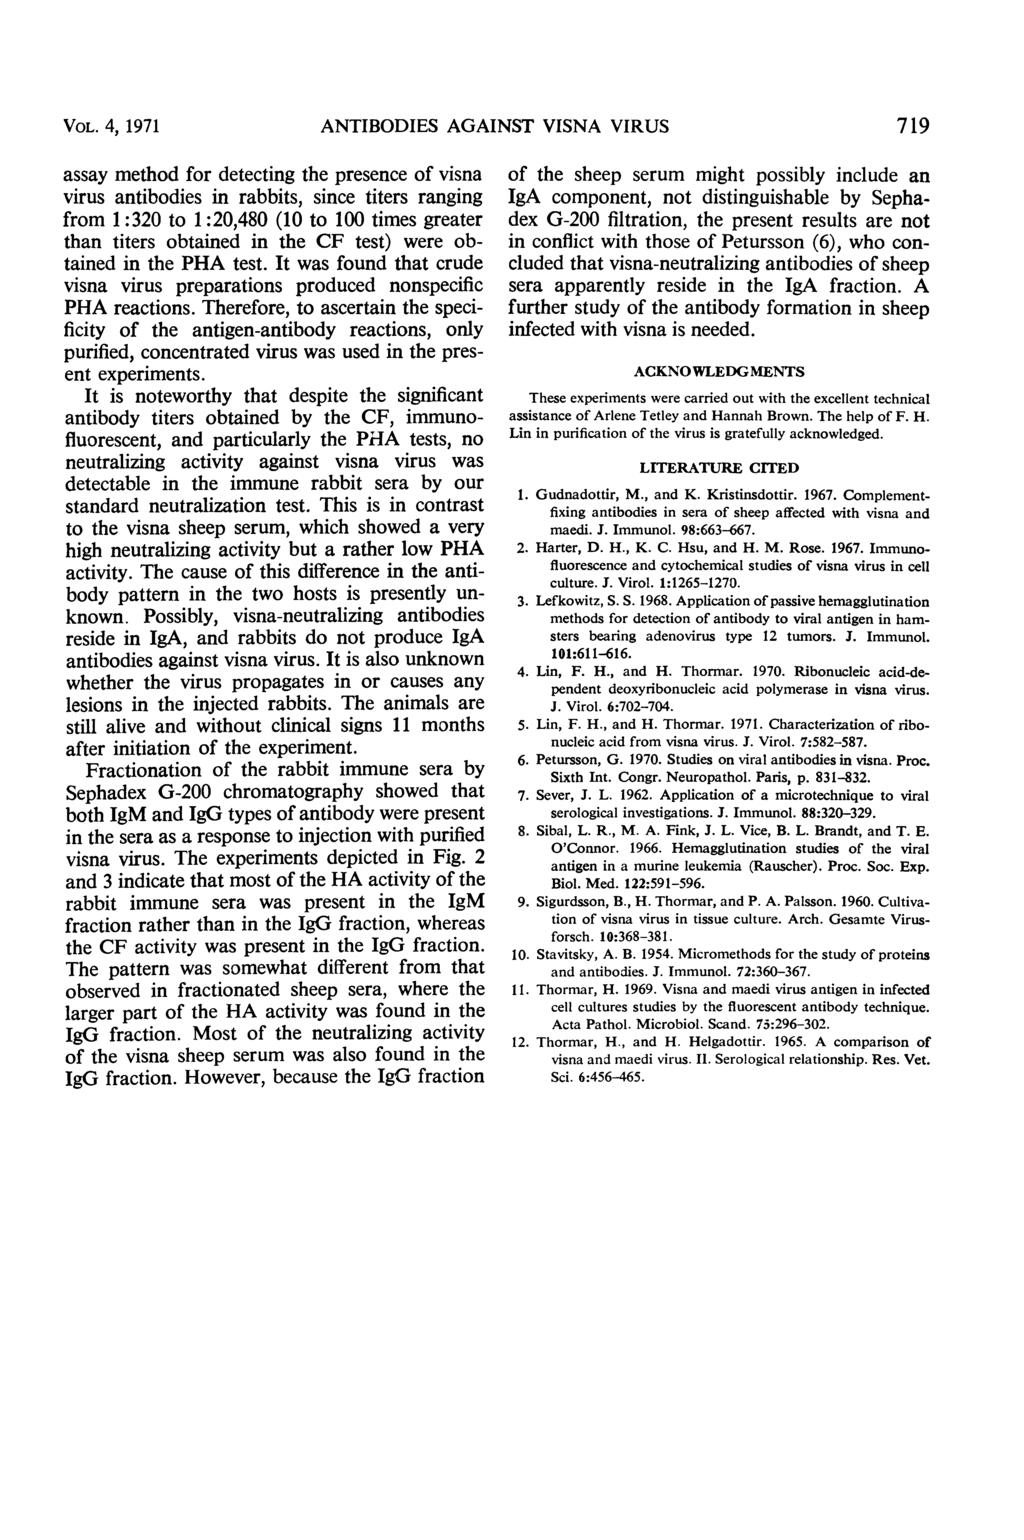 VOL. 4, 1971 ANTIBODIES AGAINST VISNA VIRUS 719 assay method for detecting the presence of visna virus antibodies in rabbits, since titers ranging from 1:32 to 1:2,48 (1 to 1 times greater than